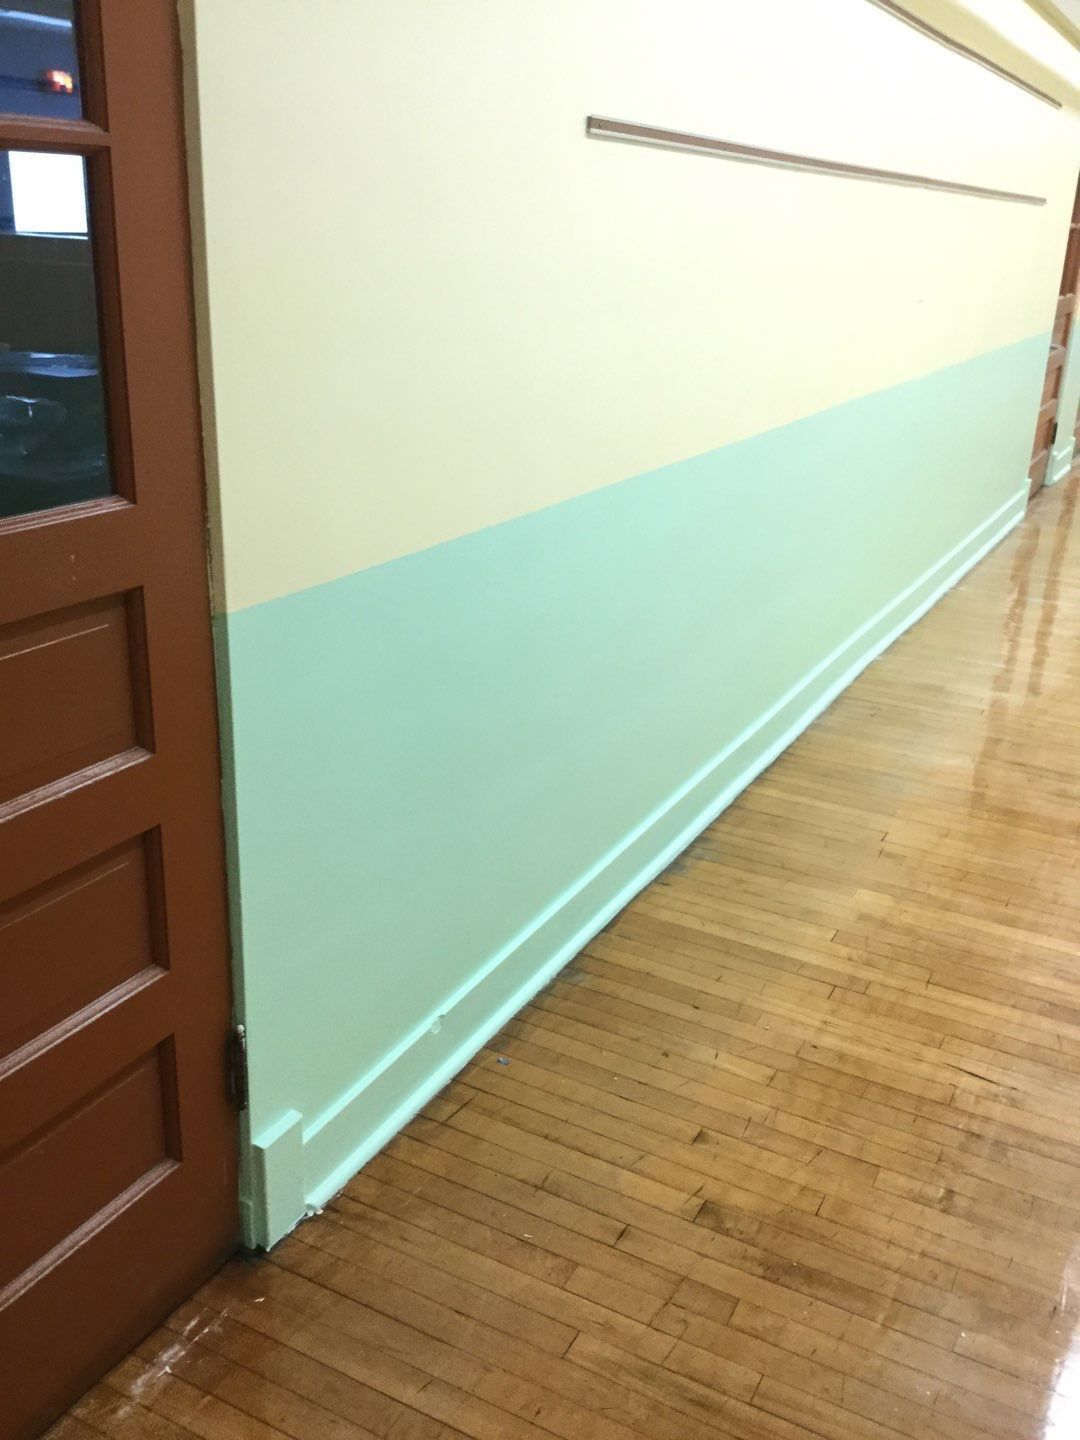 a hallway with a wooden floor and two walls painted different colors